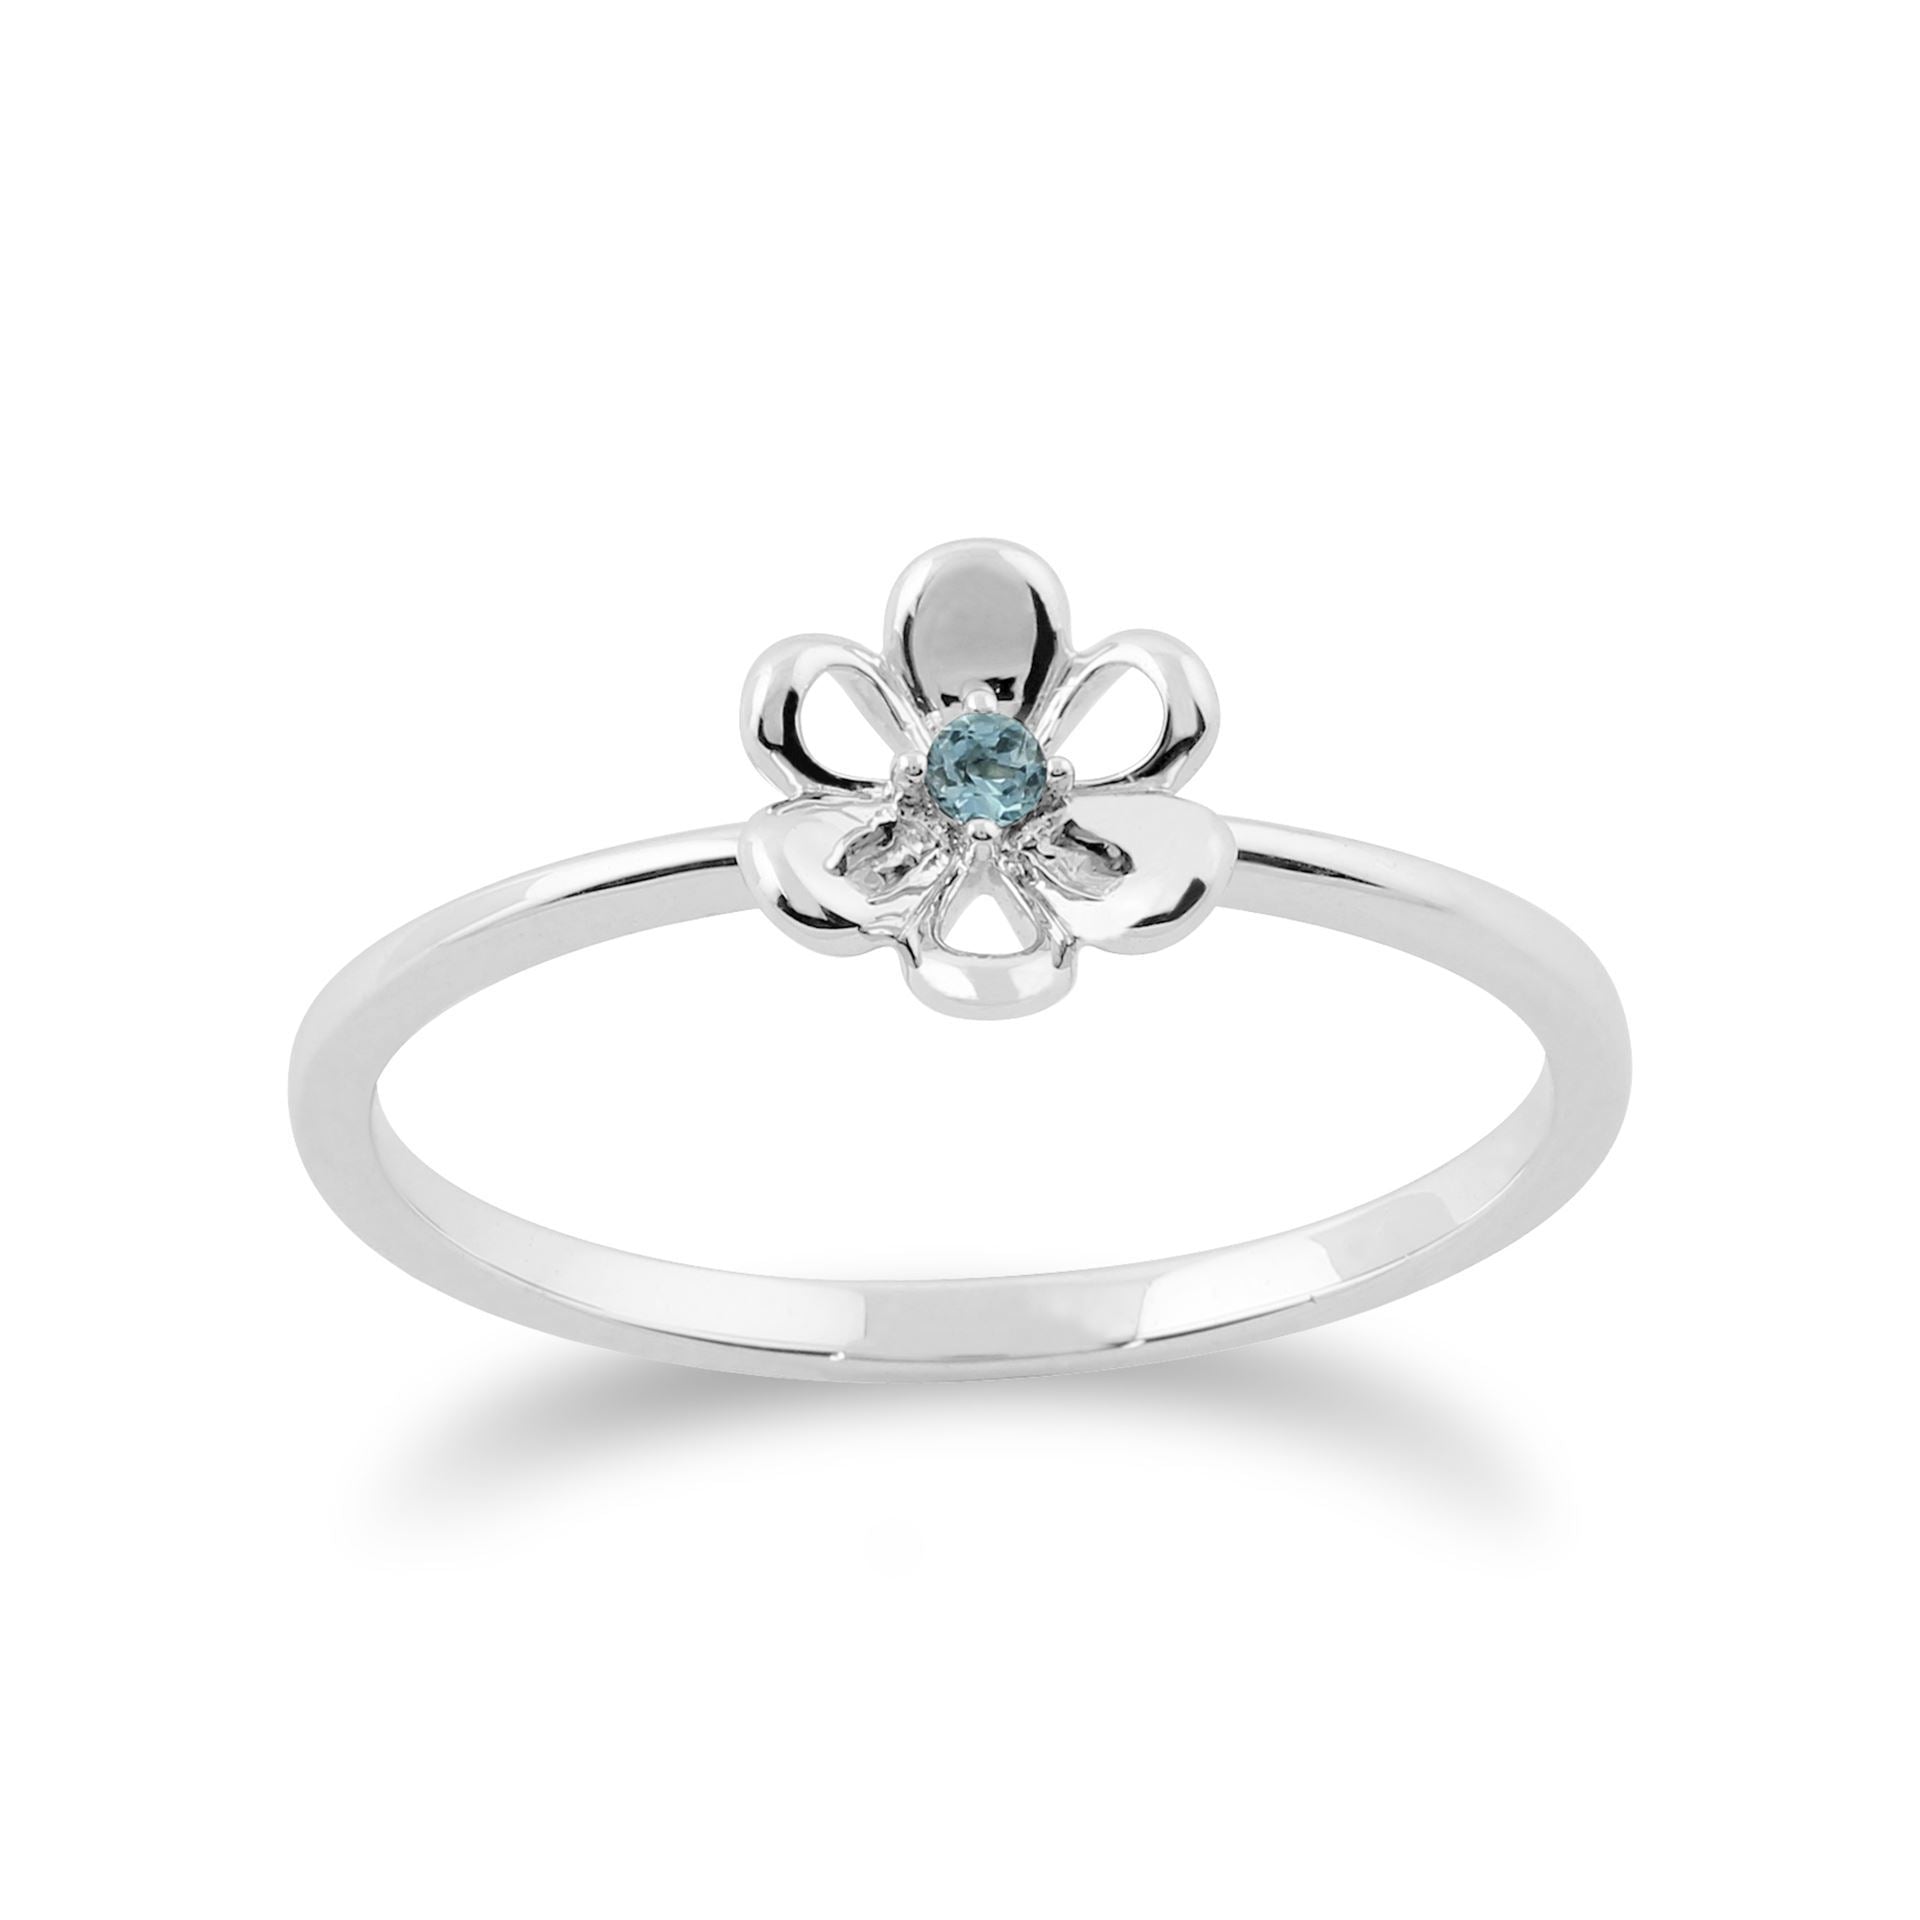 Gemondo 9ct White Gold 0.02ct Blue Topaz Stackable Floral Ring Image 1